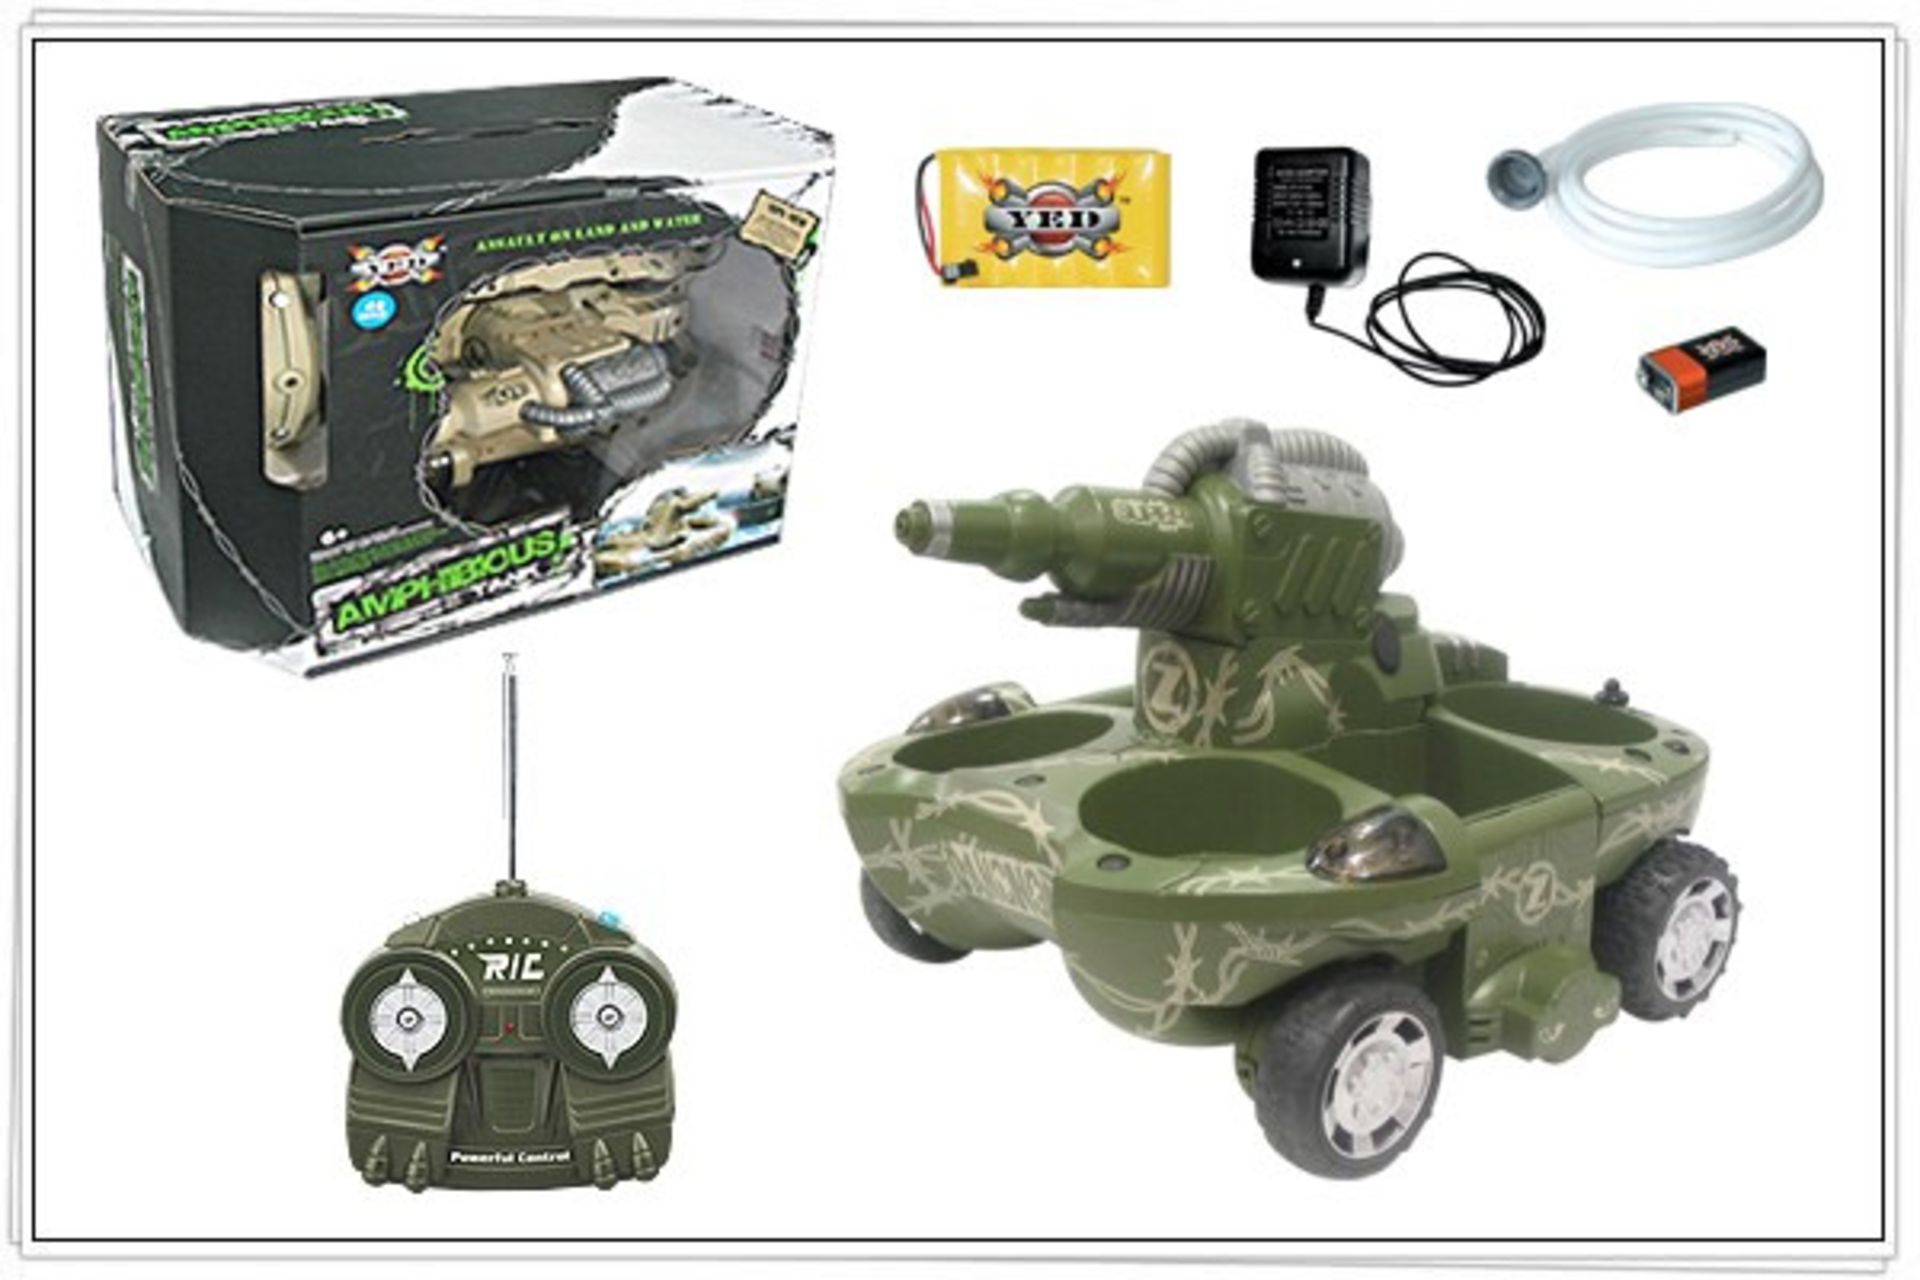 V R/C Amphibious Super Tank with Water Firing Cannon works on land & water RRP74.99